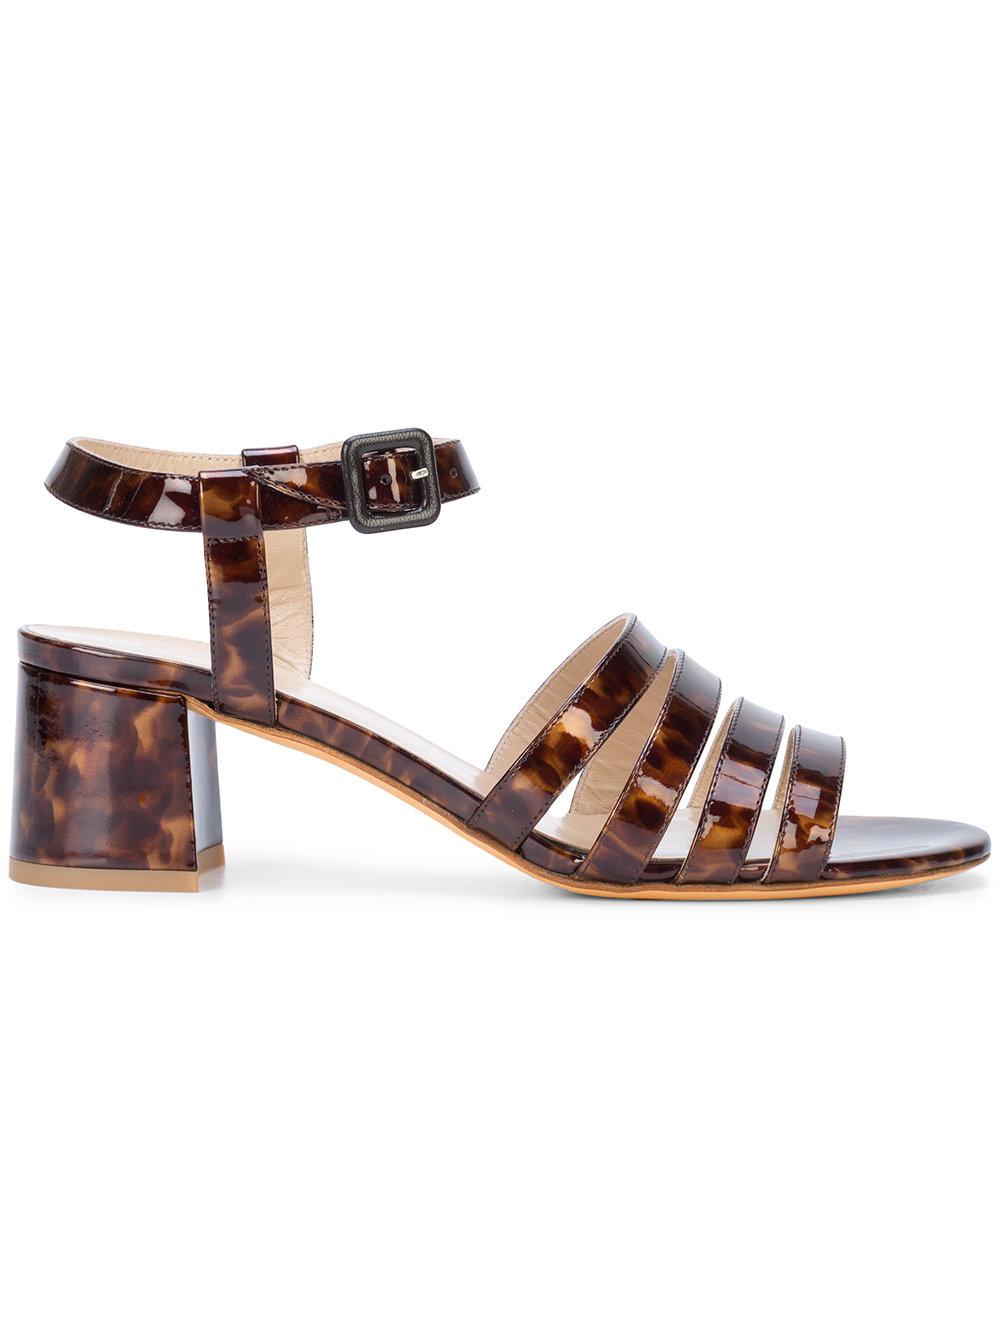 Maryam Nassir Zadeh Leather Palma Low Patent Sandal in Brown | Lyst